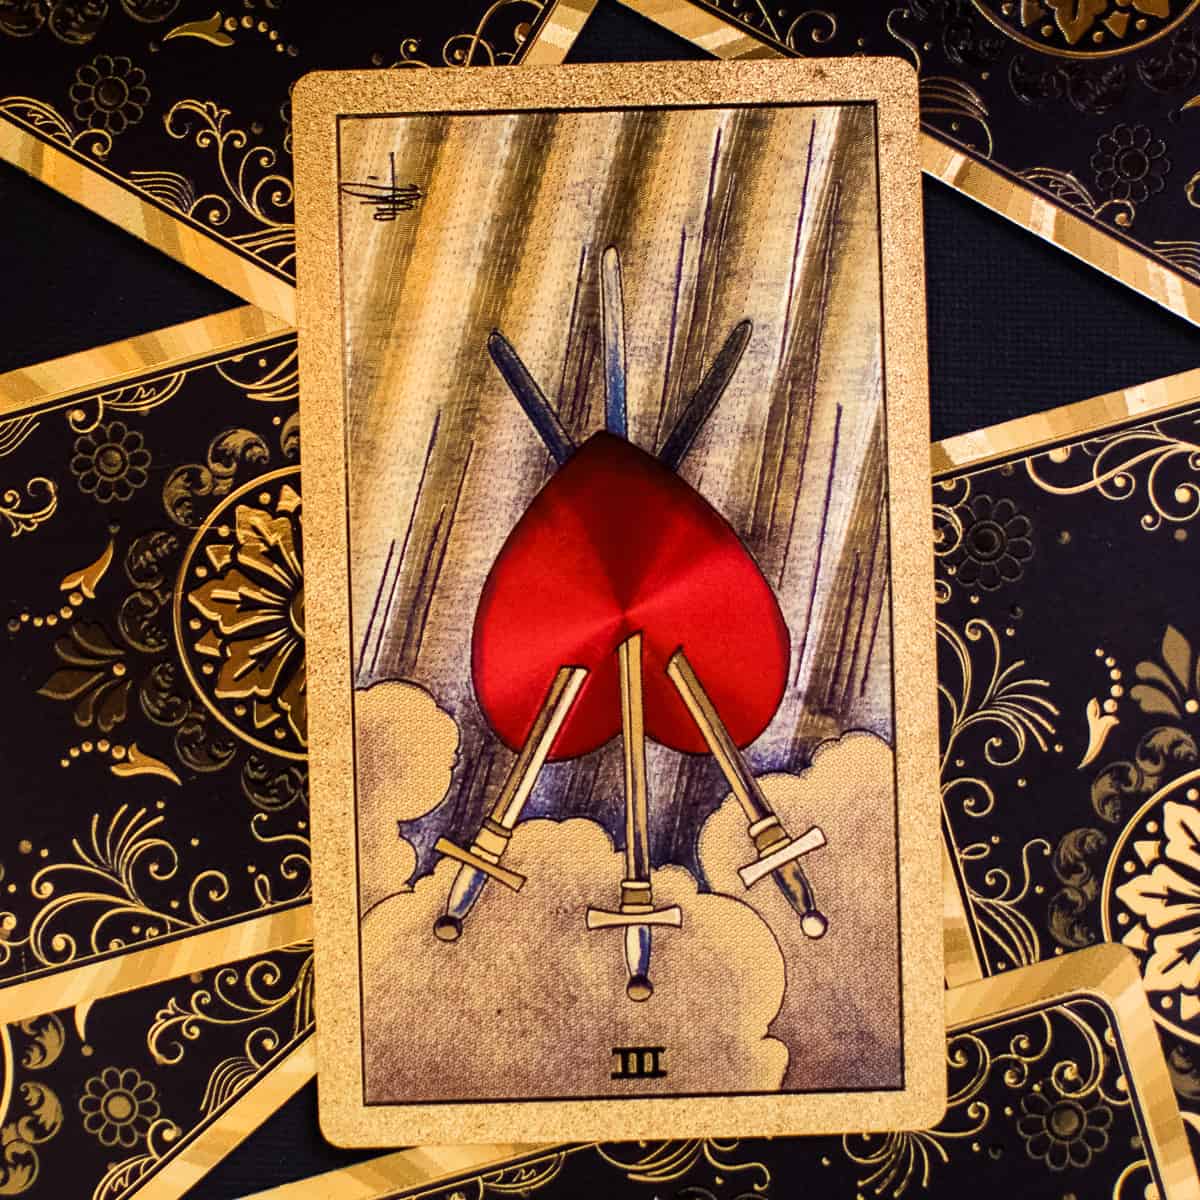 Three of Swords tarot card in the reverse position, depicting a heart with three swords pierced through it.